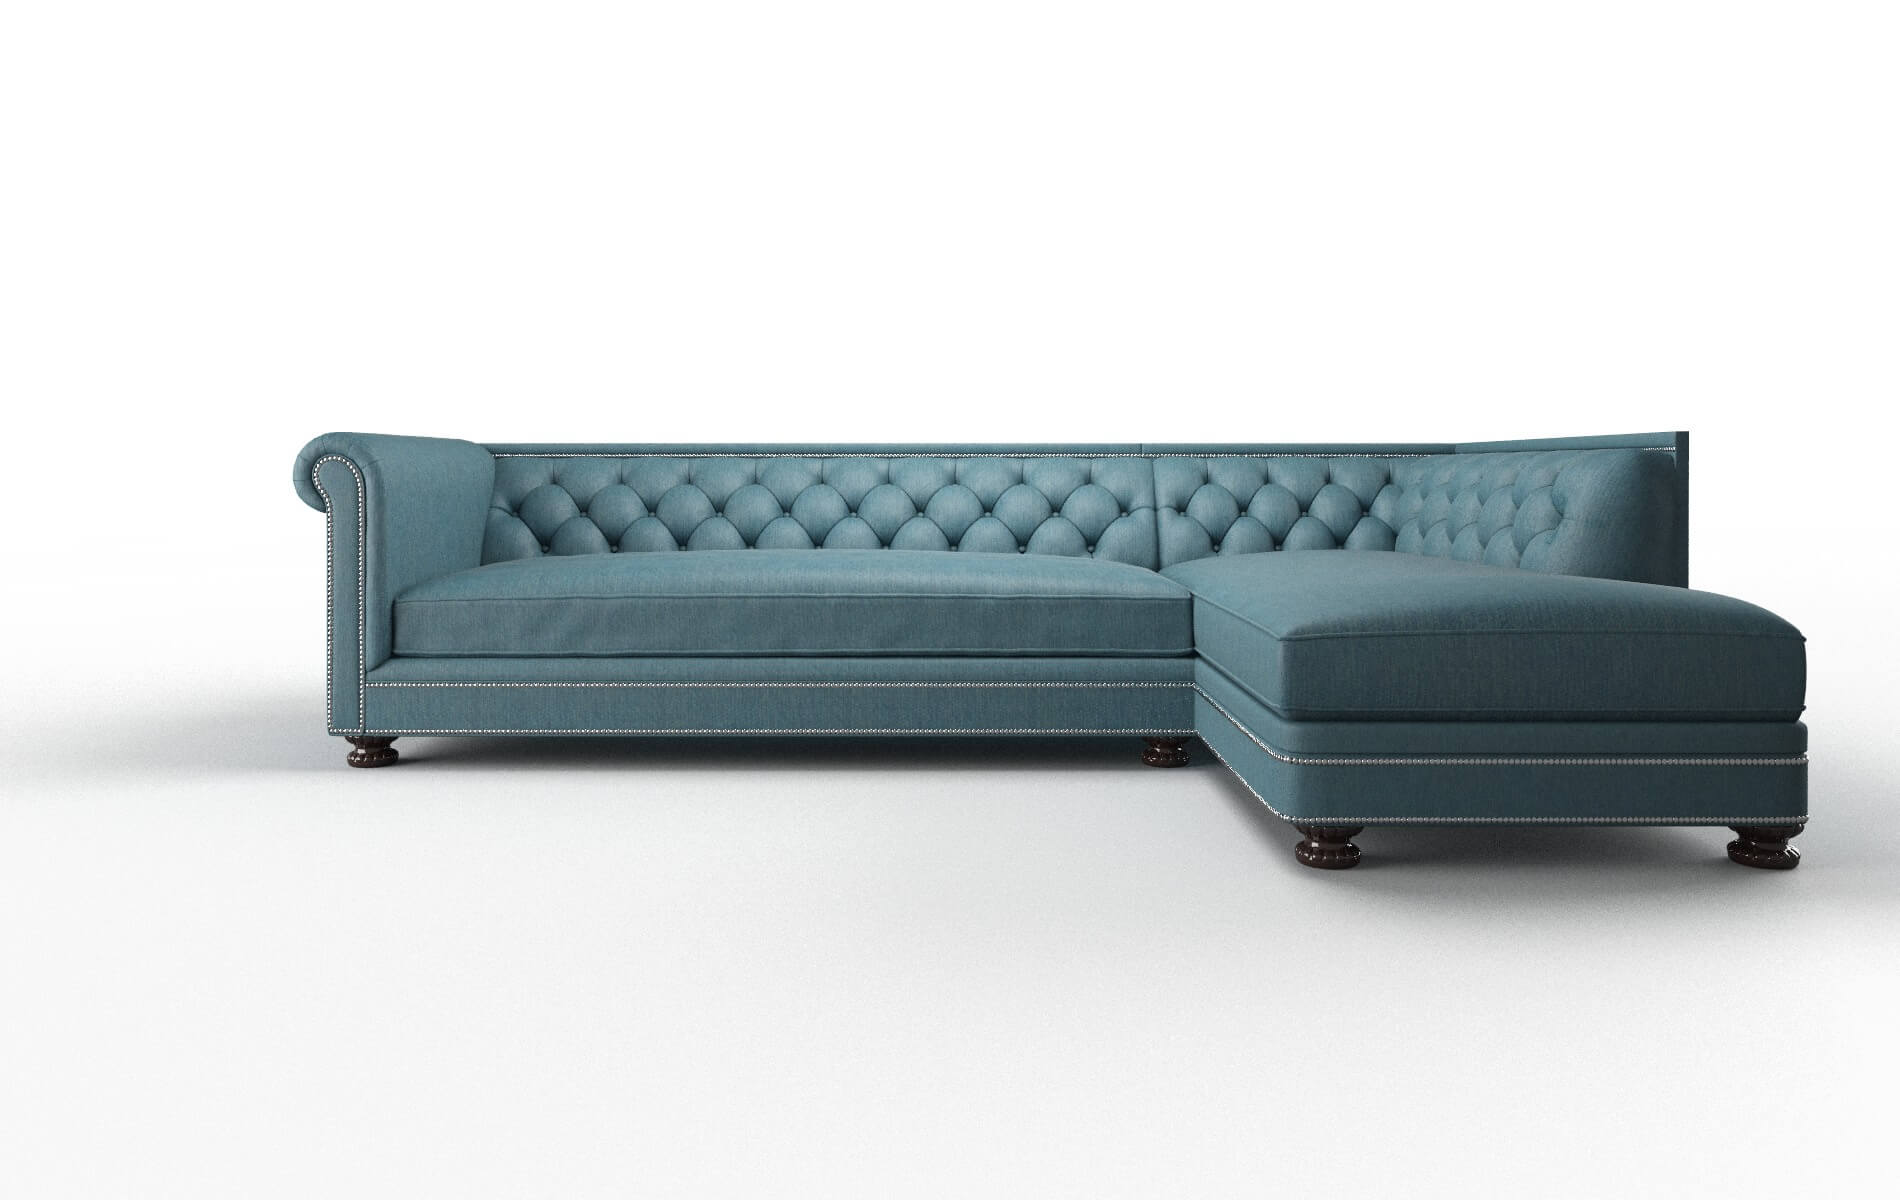 Athens Cosmo Teal chair espresso legs